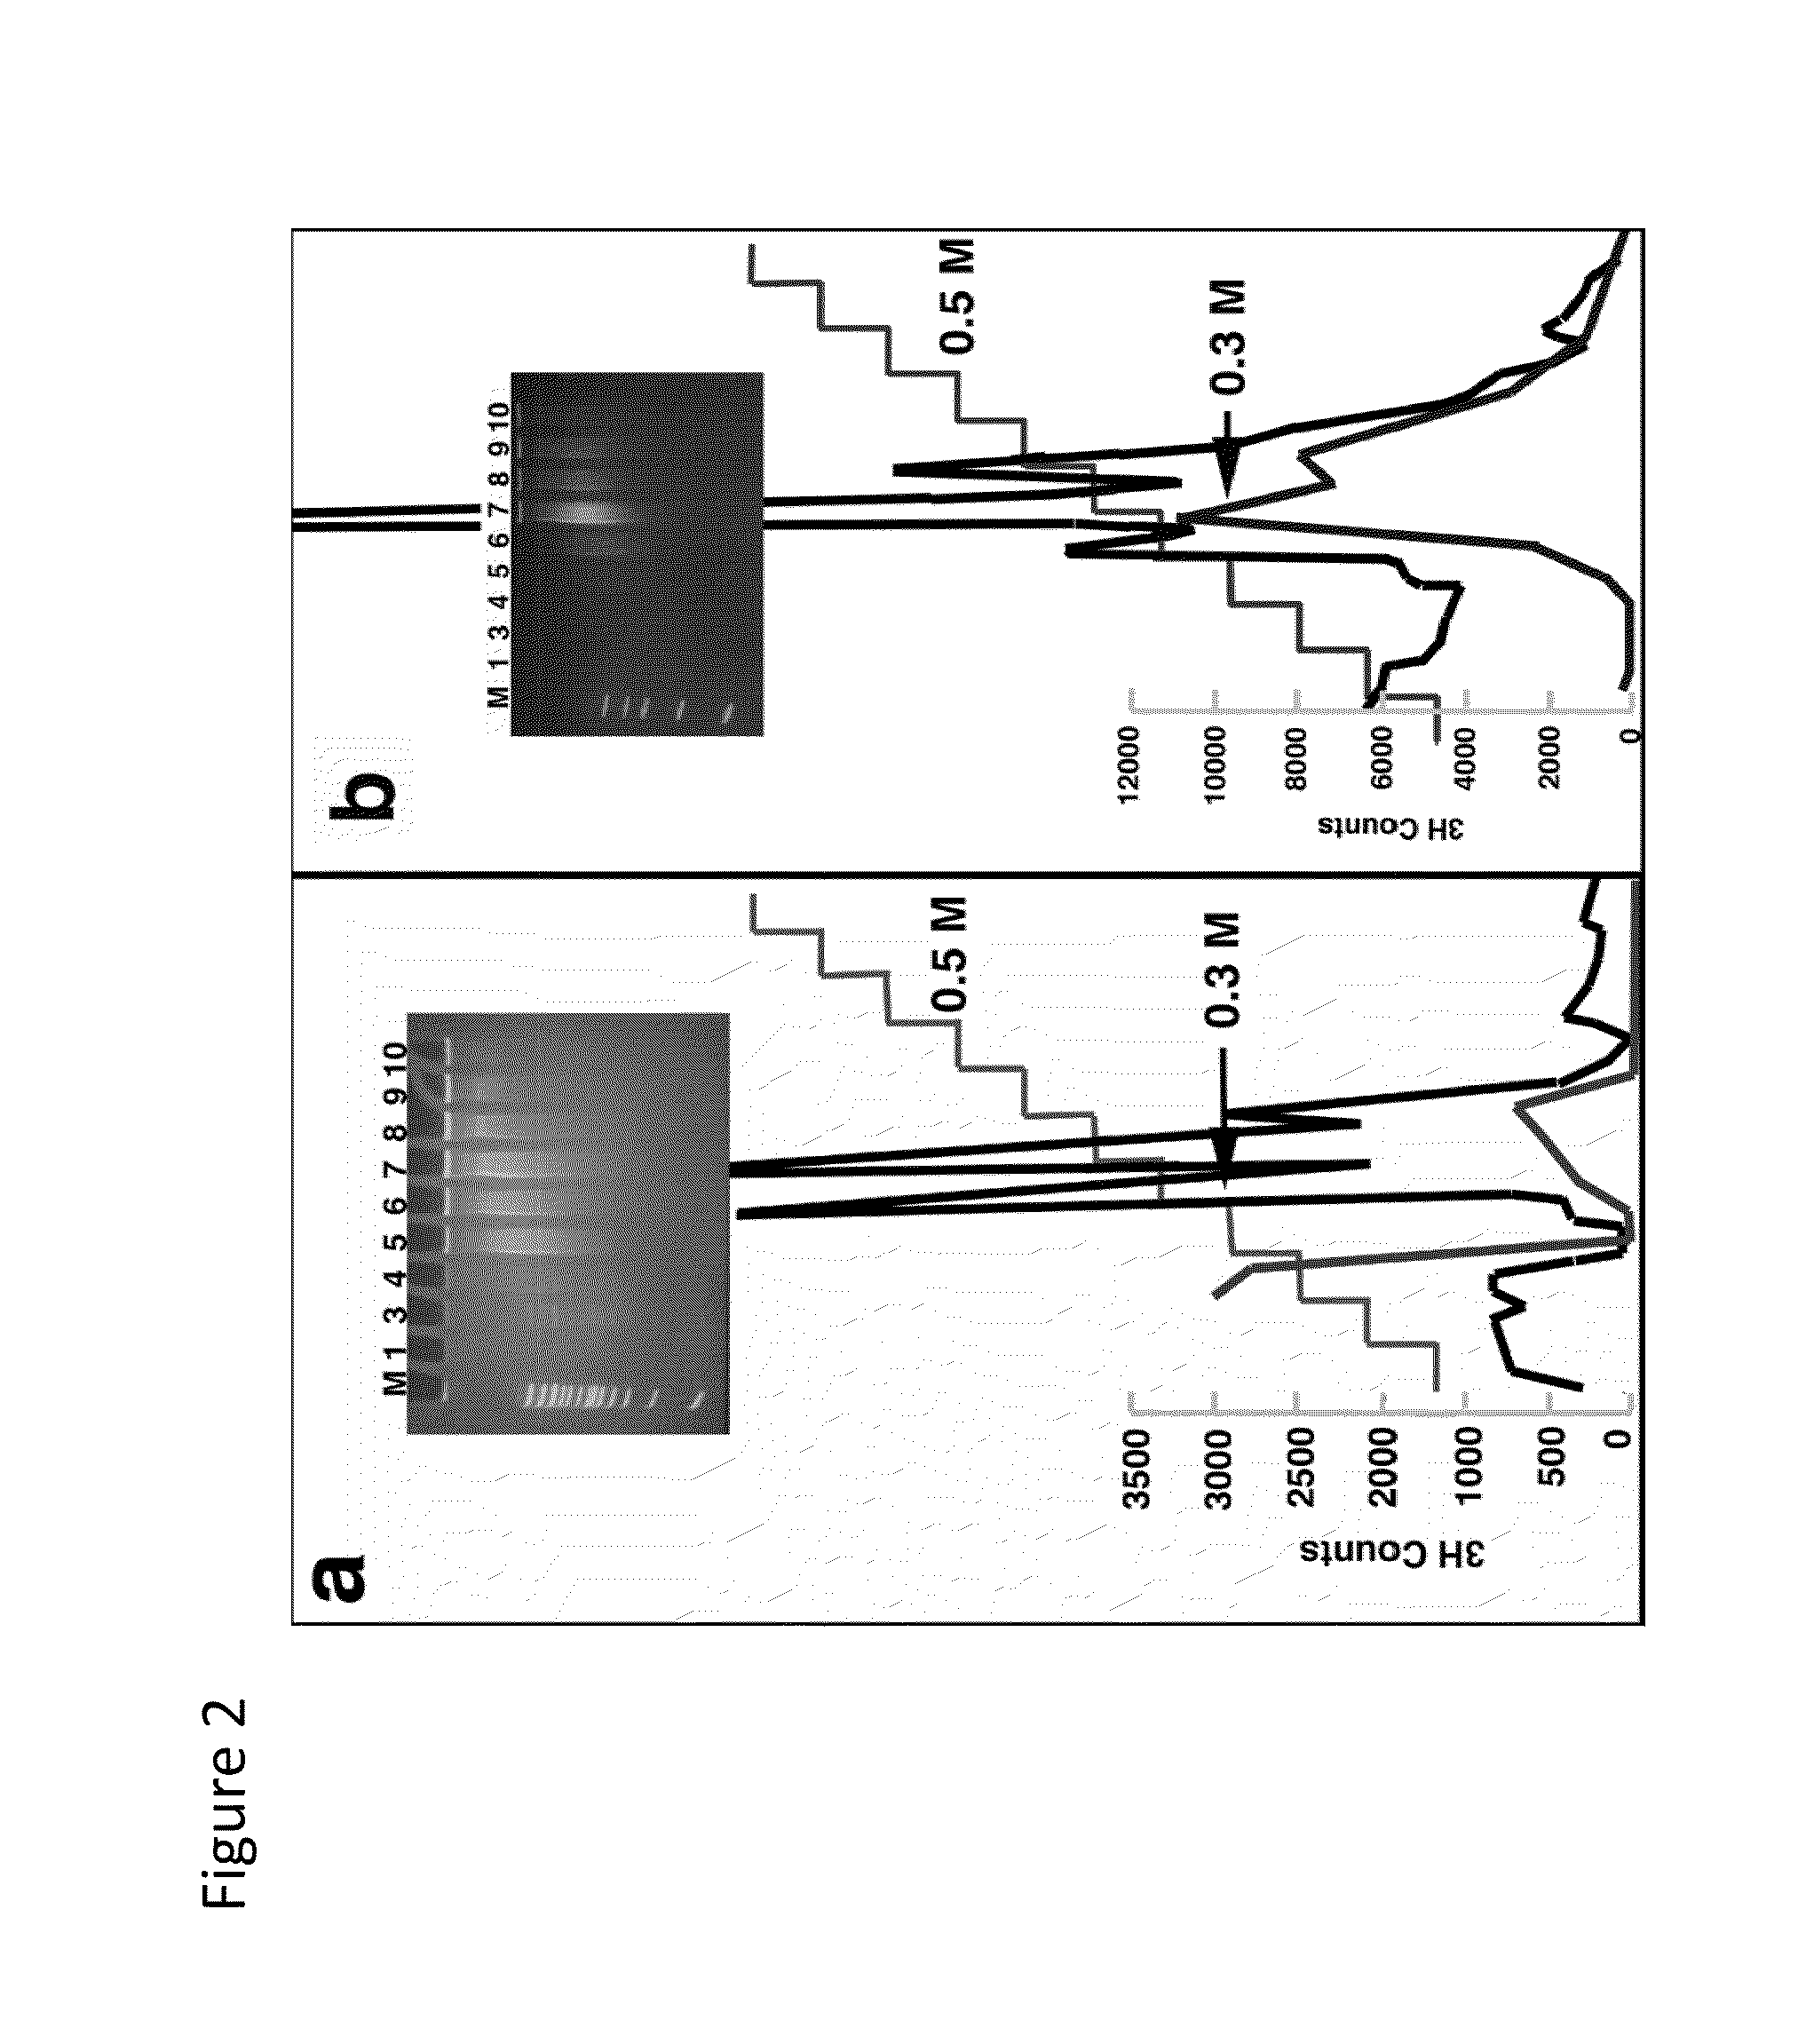 Method for enriching methylated CpG sequences